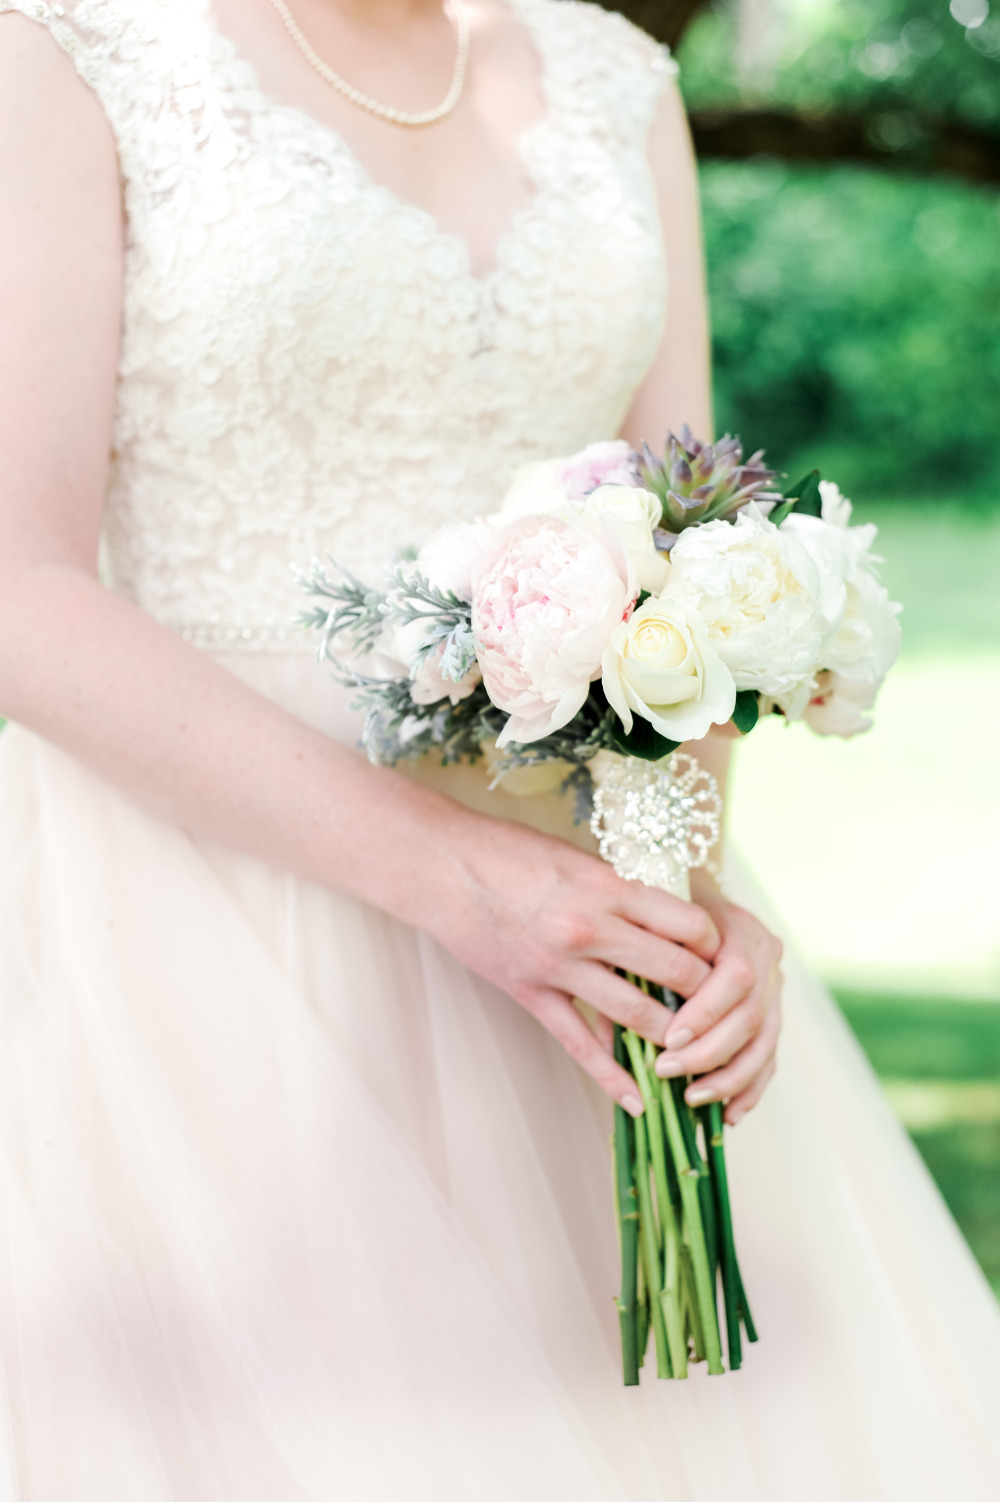 long stem wedding bouquet with peonies